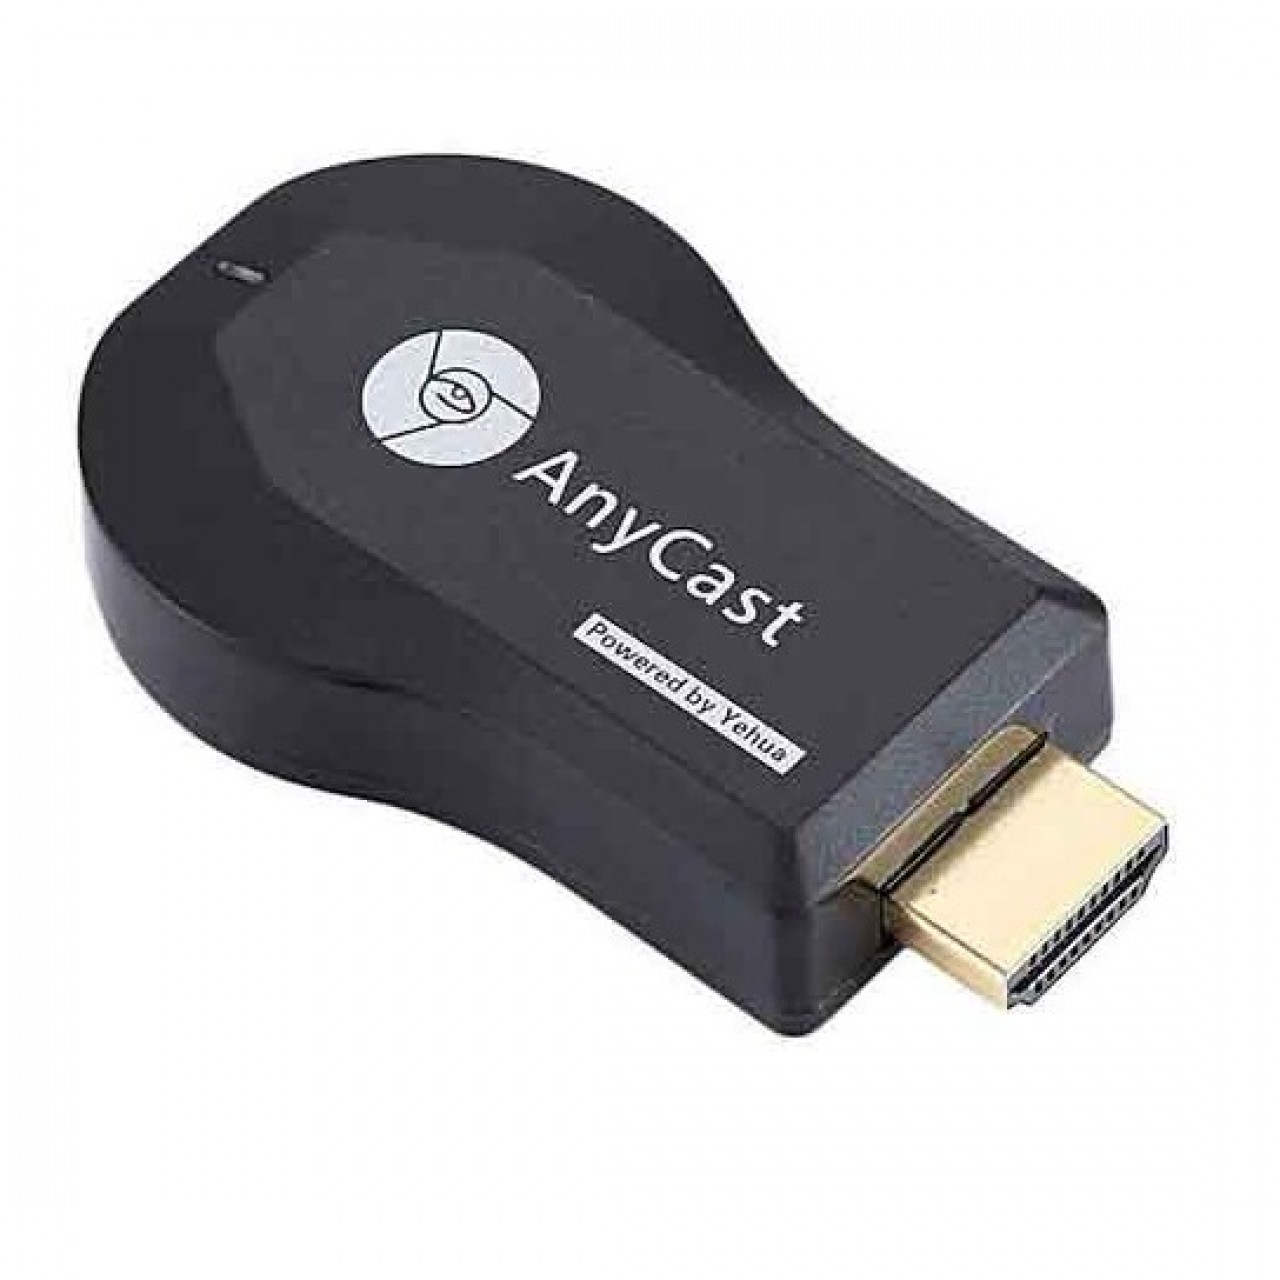 HDMI TV Stick AnyCast M9 Plus 2Core 1080P Wireless WiFi Display TV Dongle Receiver Miracast